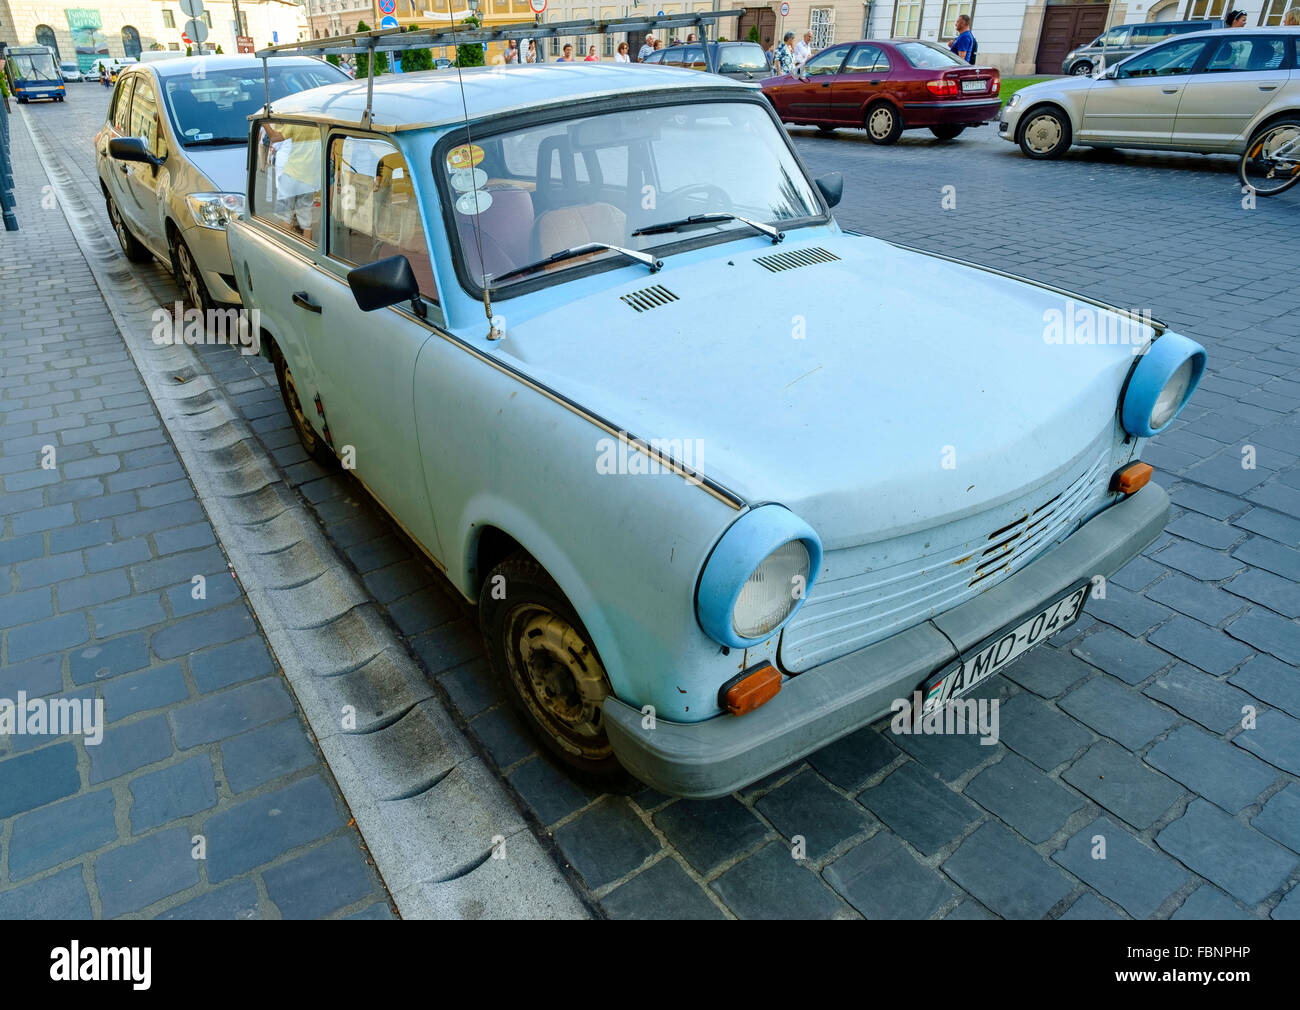 Trabant car made in former East Germany on street in Budapest Hungary Stock Photo